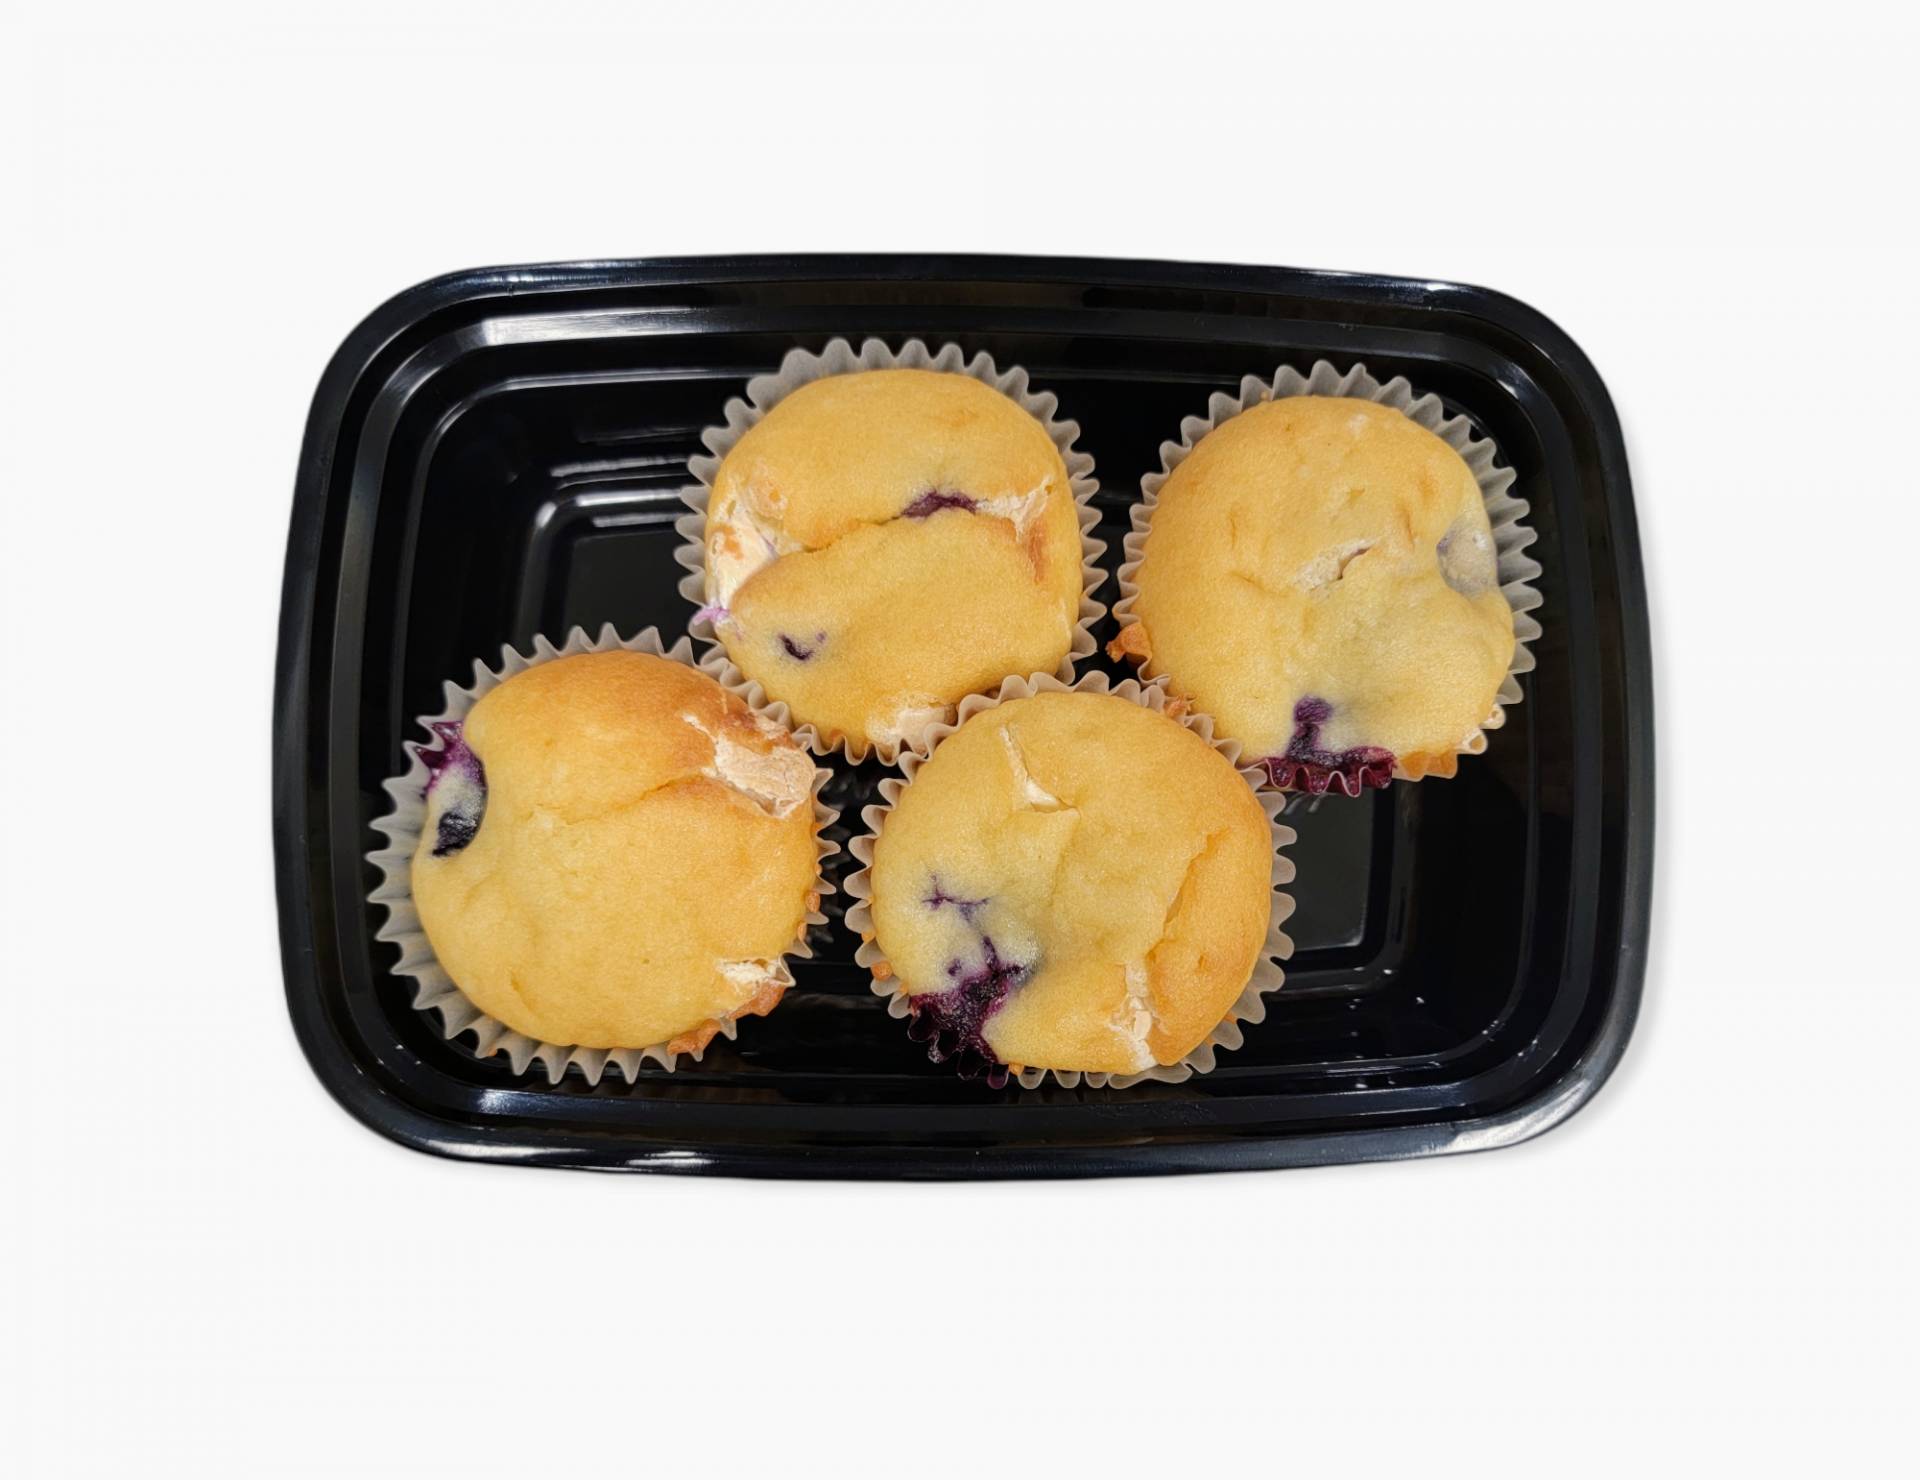 Blueberry Cheesecake Muffins- 4 pack